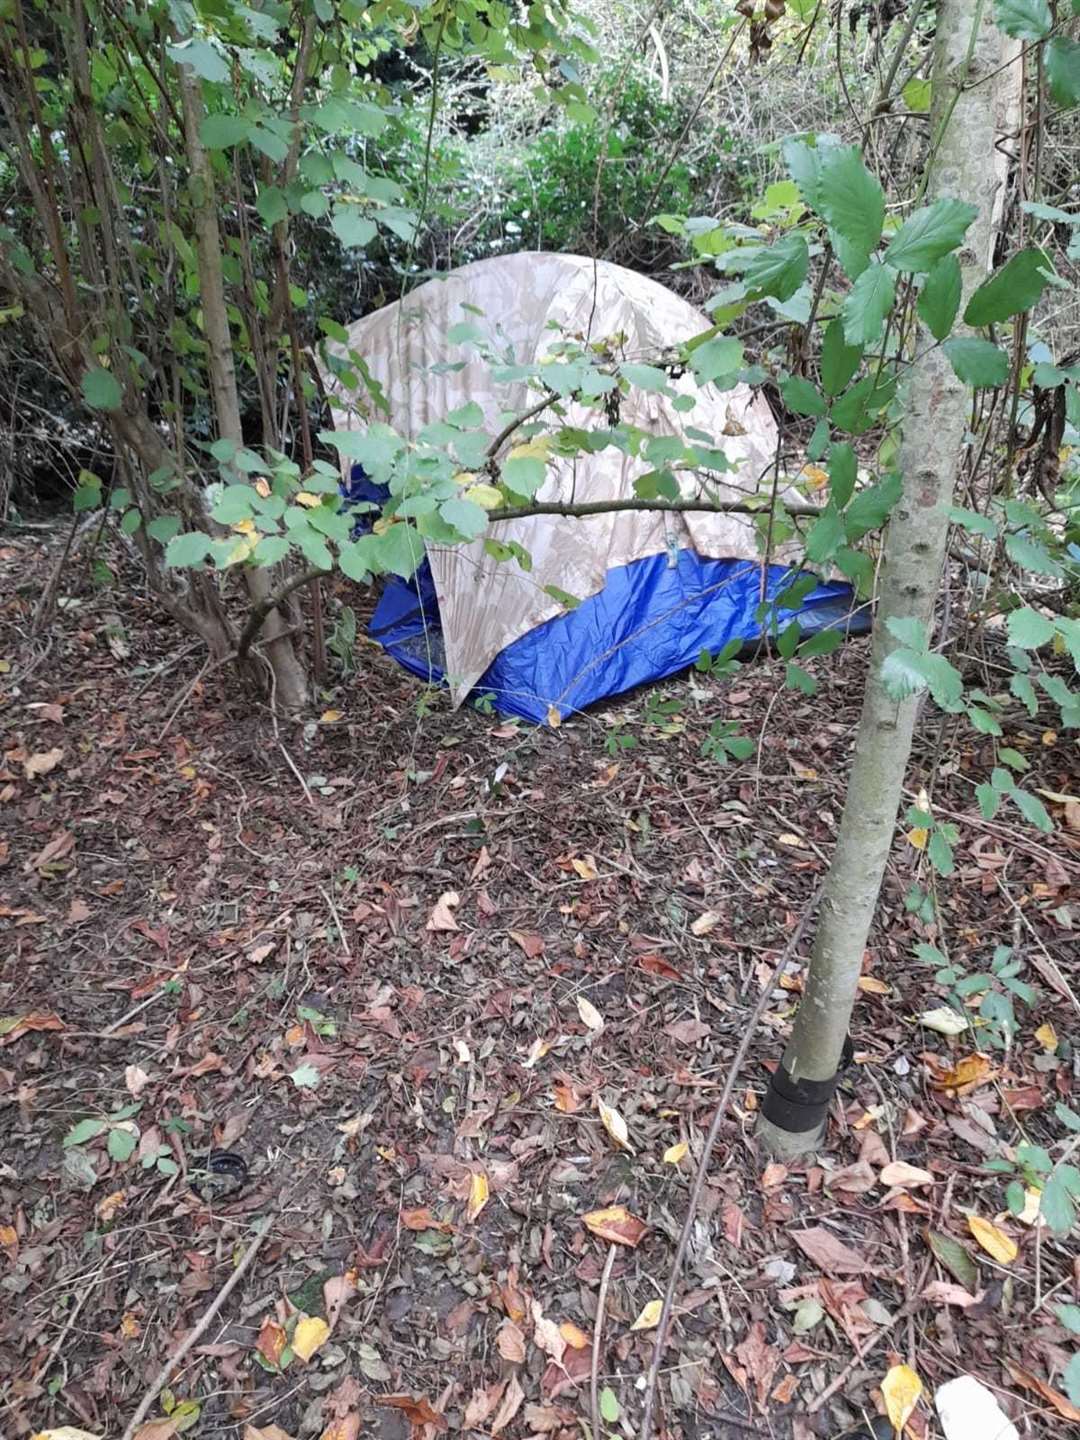 Neil's camp site in the woods